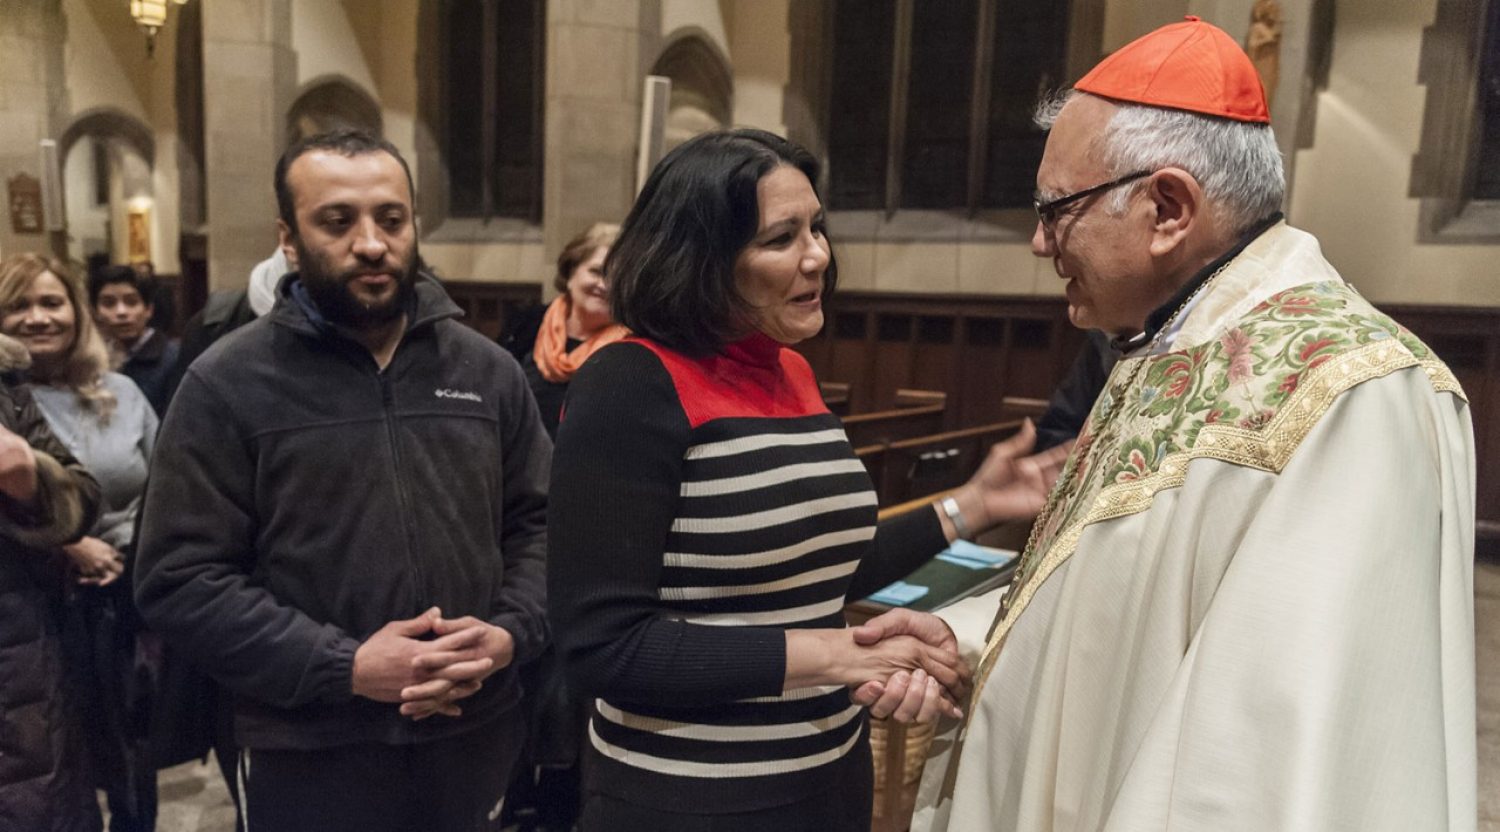 Cardinal Baltazar Porras from the Pontifical Commission for Latin America presided at a Mass for immigrants a St. Ignatius Church, which closed the week-long Ibero-American Conference of Theology at Boston College.